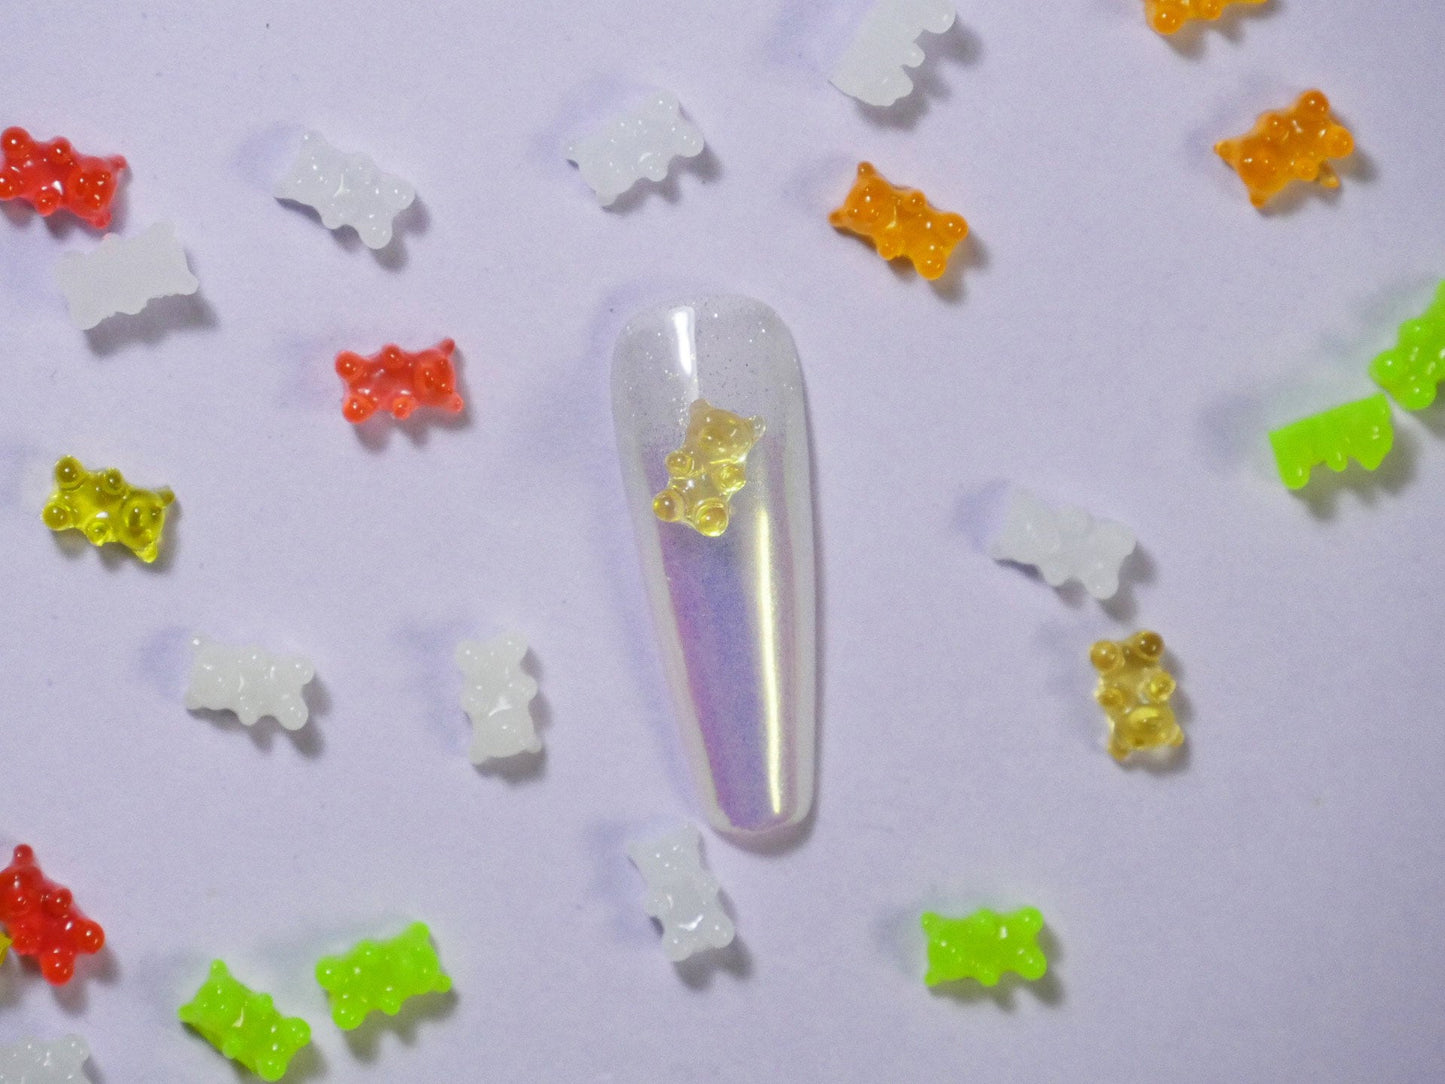 10pcs Candy Gummy Bear Flatbacks Decals/ Miniature Gummy candies Frosted Teddy Bears Charms Resin craft supply